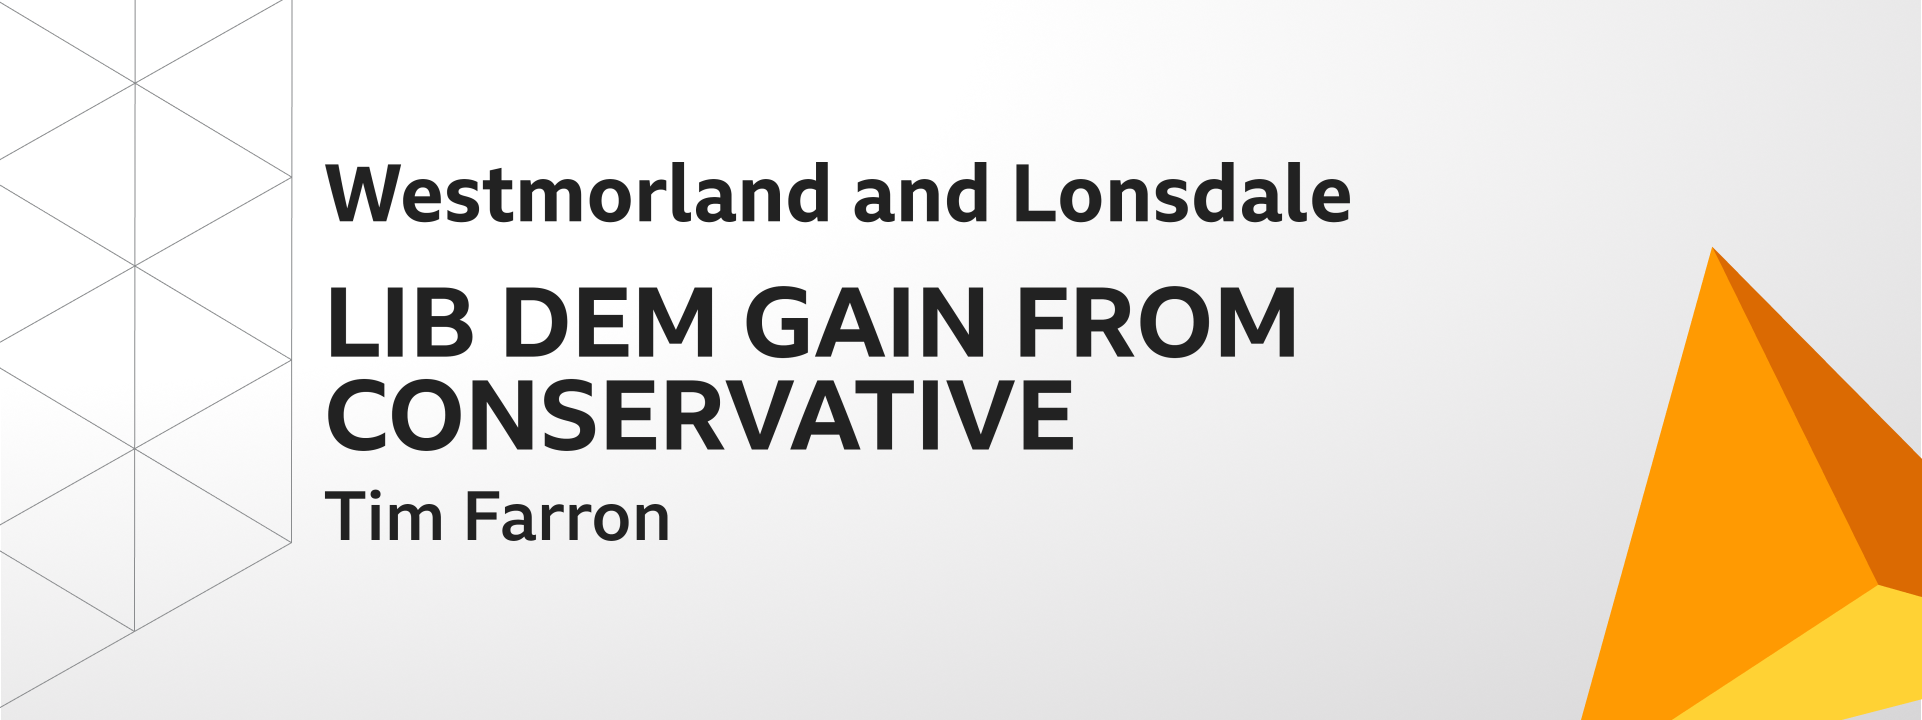 Graphic showing Liberal Democrats gain Westmorland and Lonsdale from the Conservatives. The winning candidate was Tim Farron.